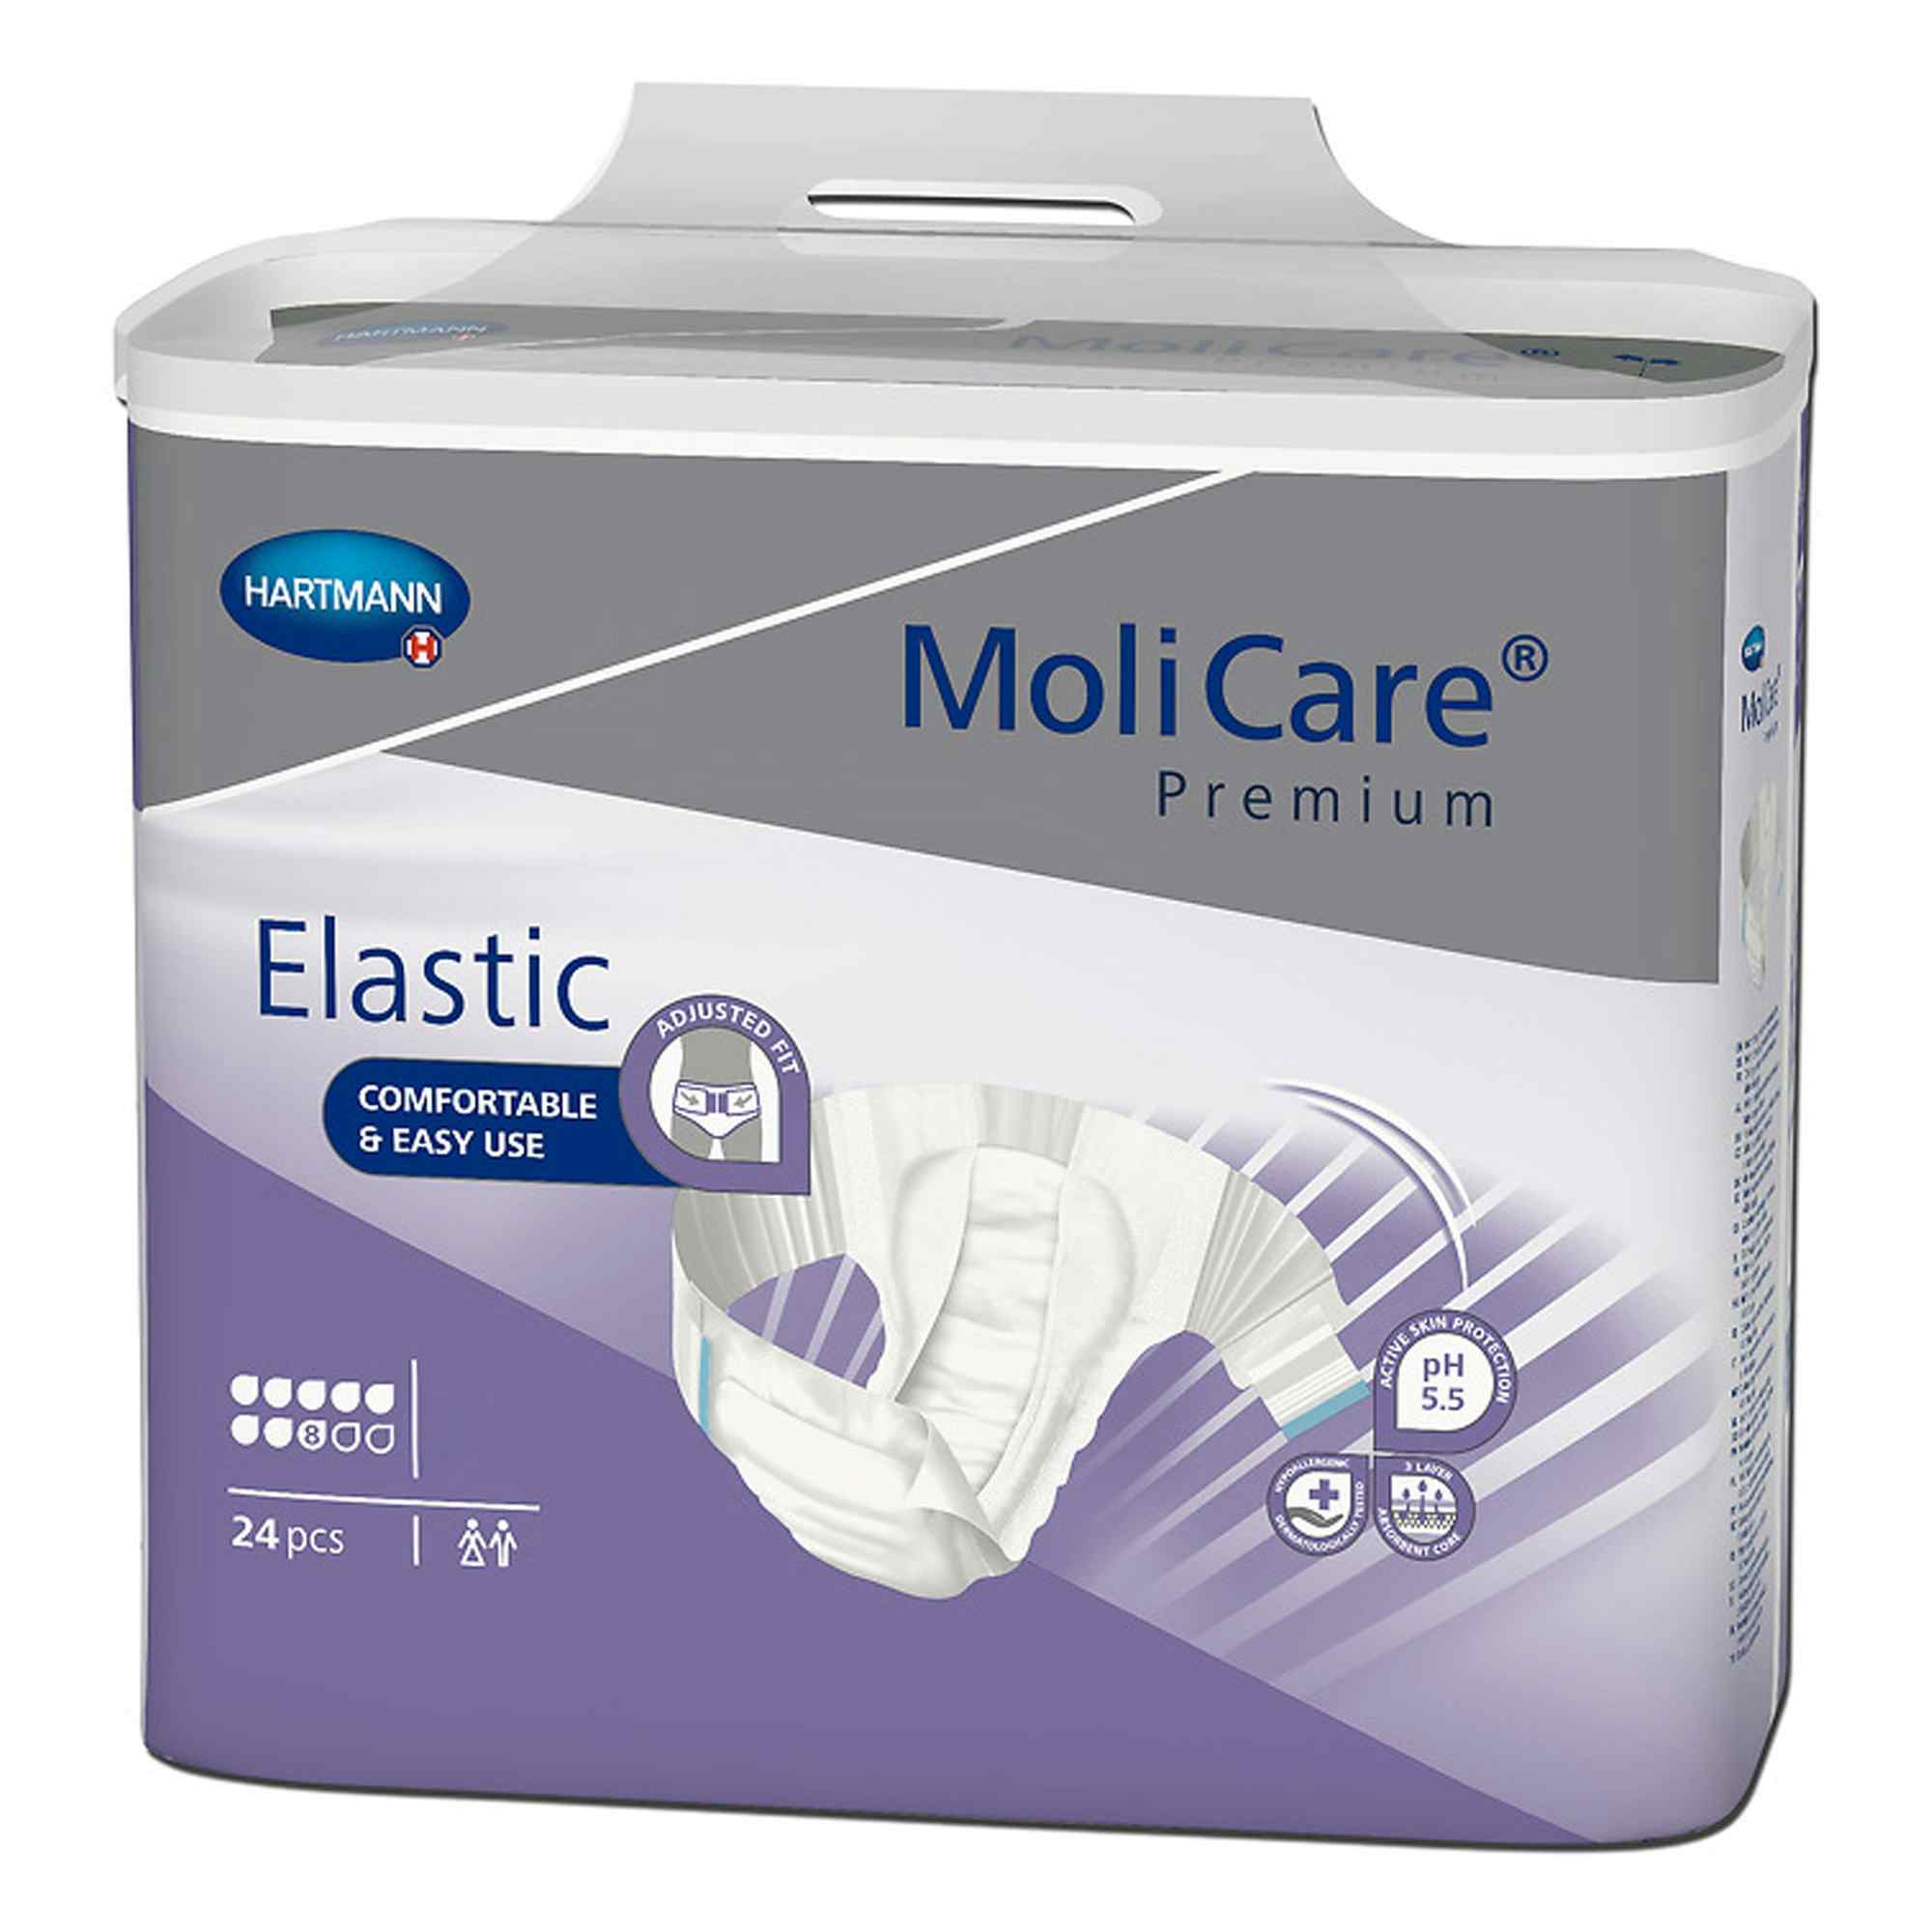 MoliCare Premium 8D Elastic Disposable Brief Adult Diapers with Tabs, Heavy Absorbency, 165474, X-Large (55-69") - Bag of 14